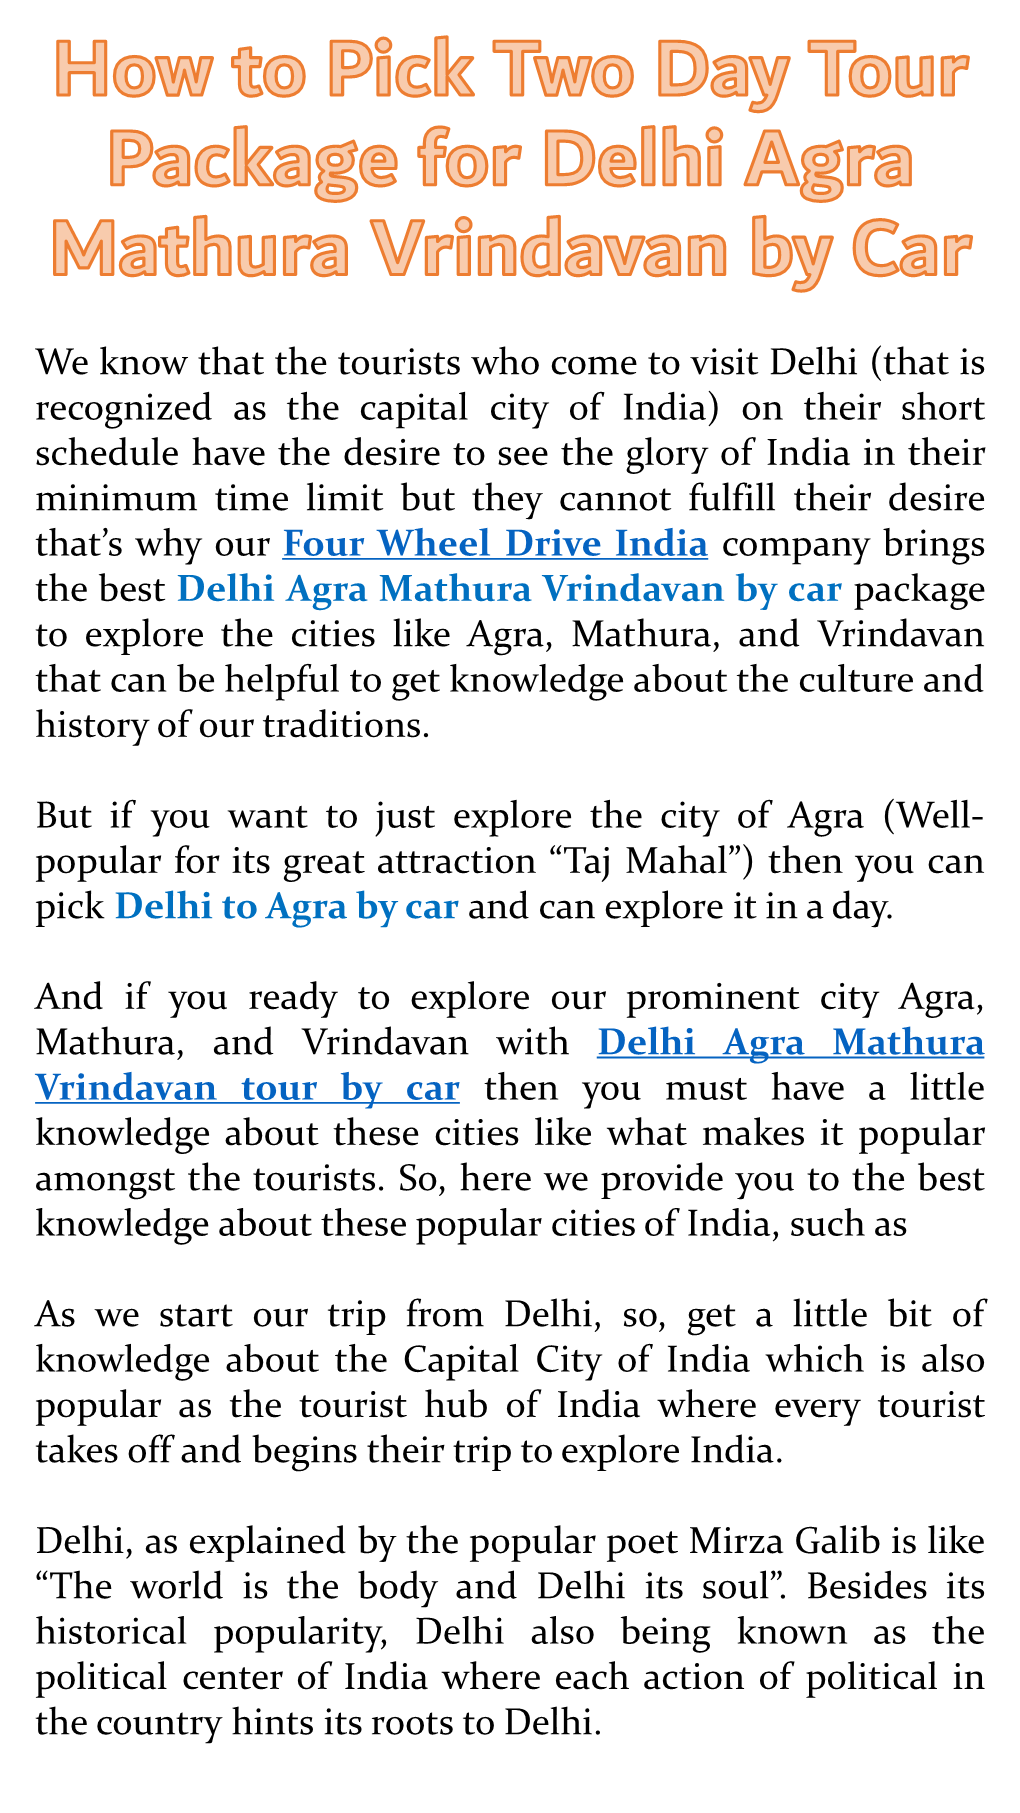 How to Pick Two Day Tour Package for Delhi Agra Mathura Vrindavan